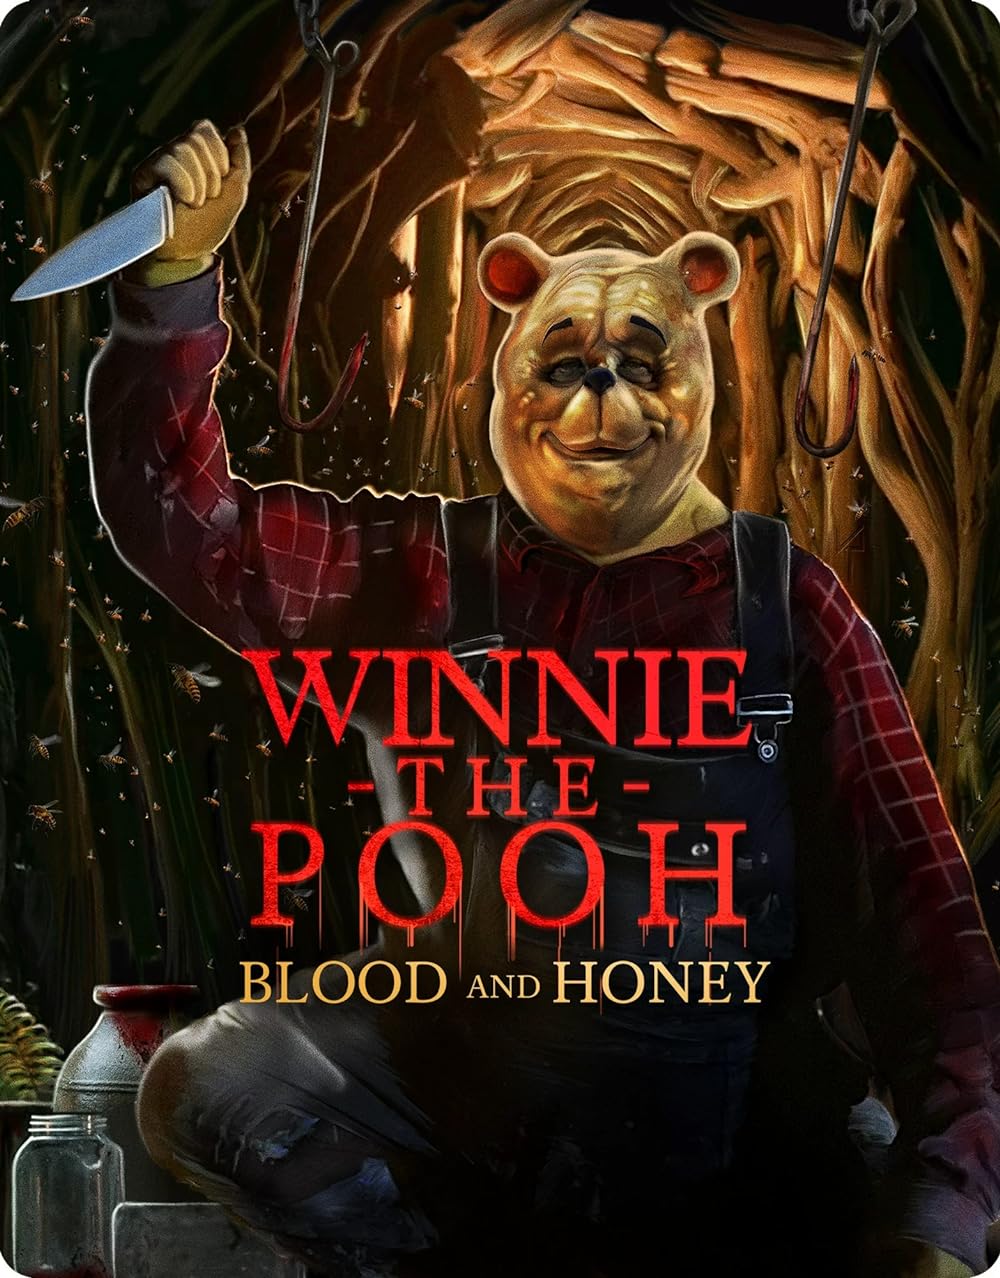 Director's Note on the Absurd Humor of "Winnie the Pooh: Blood and Honey"